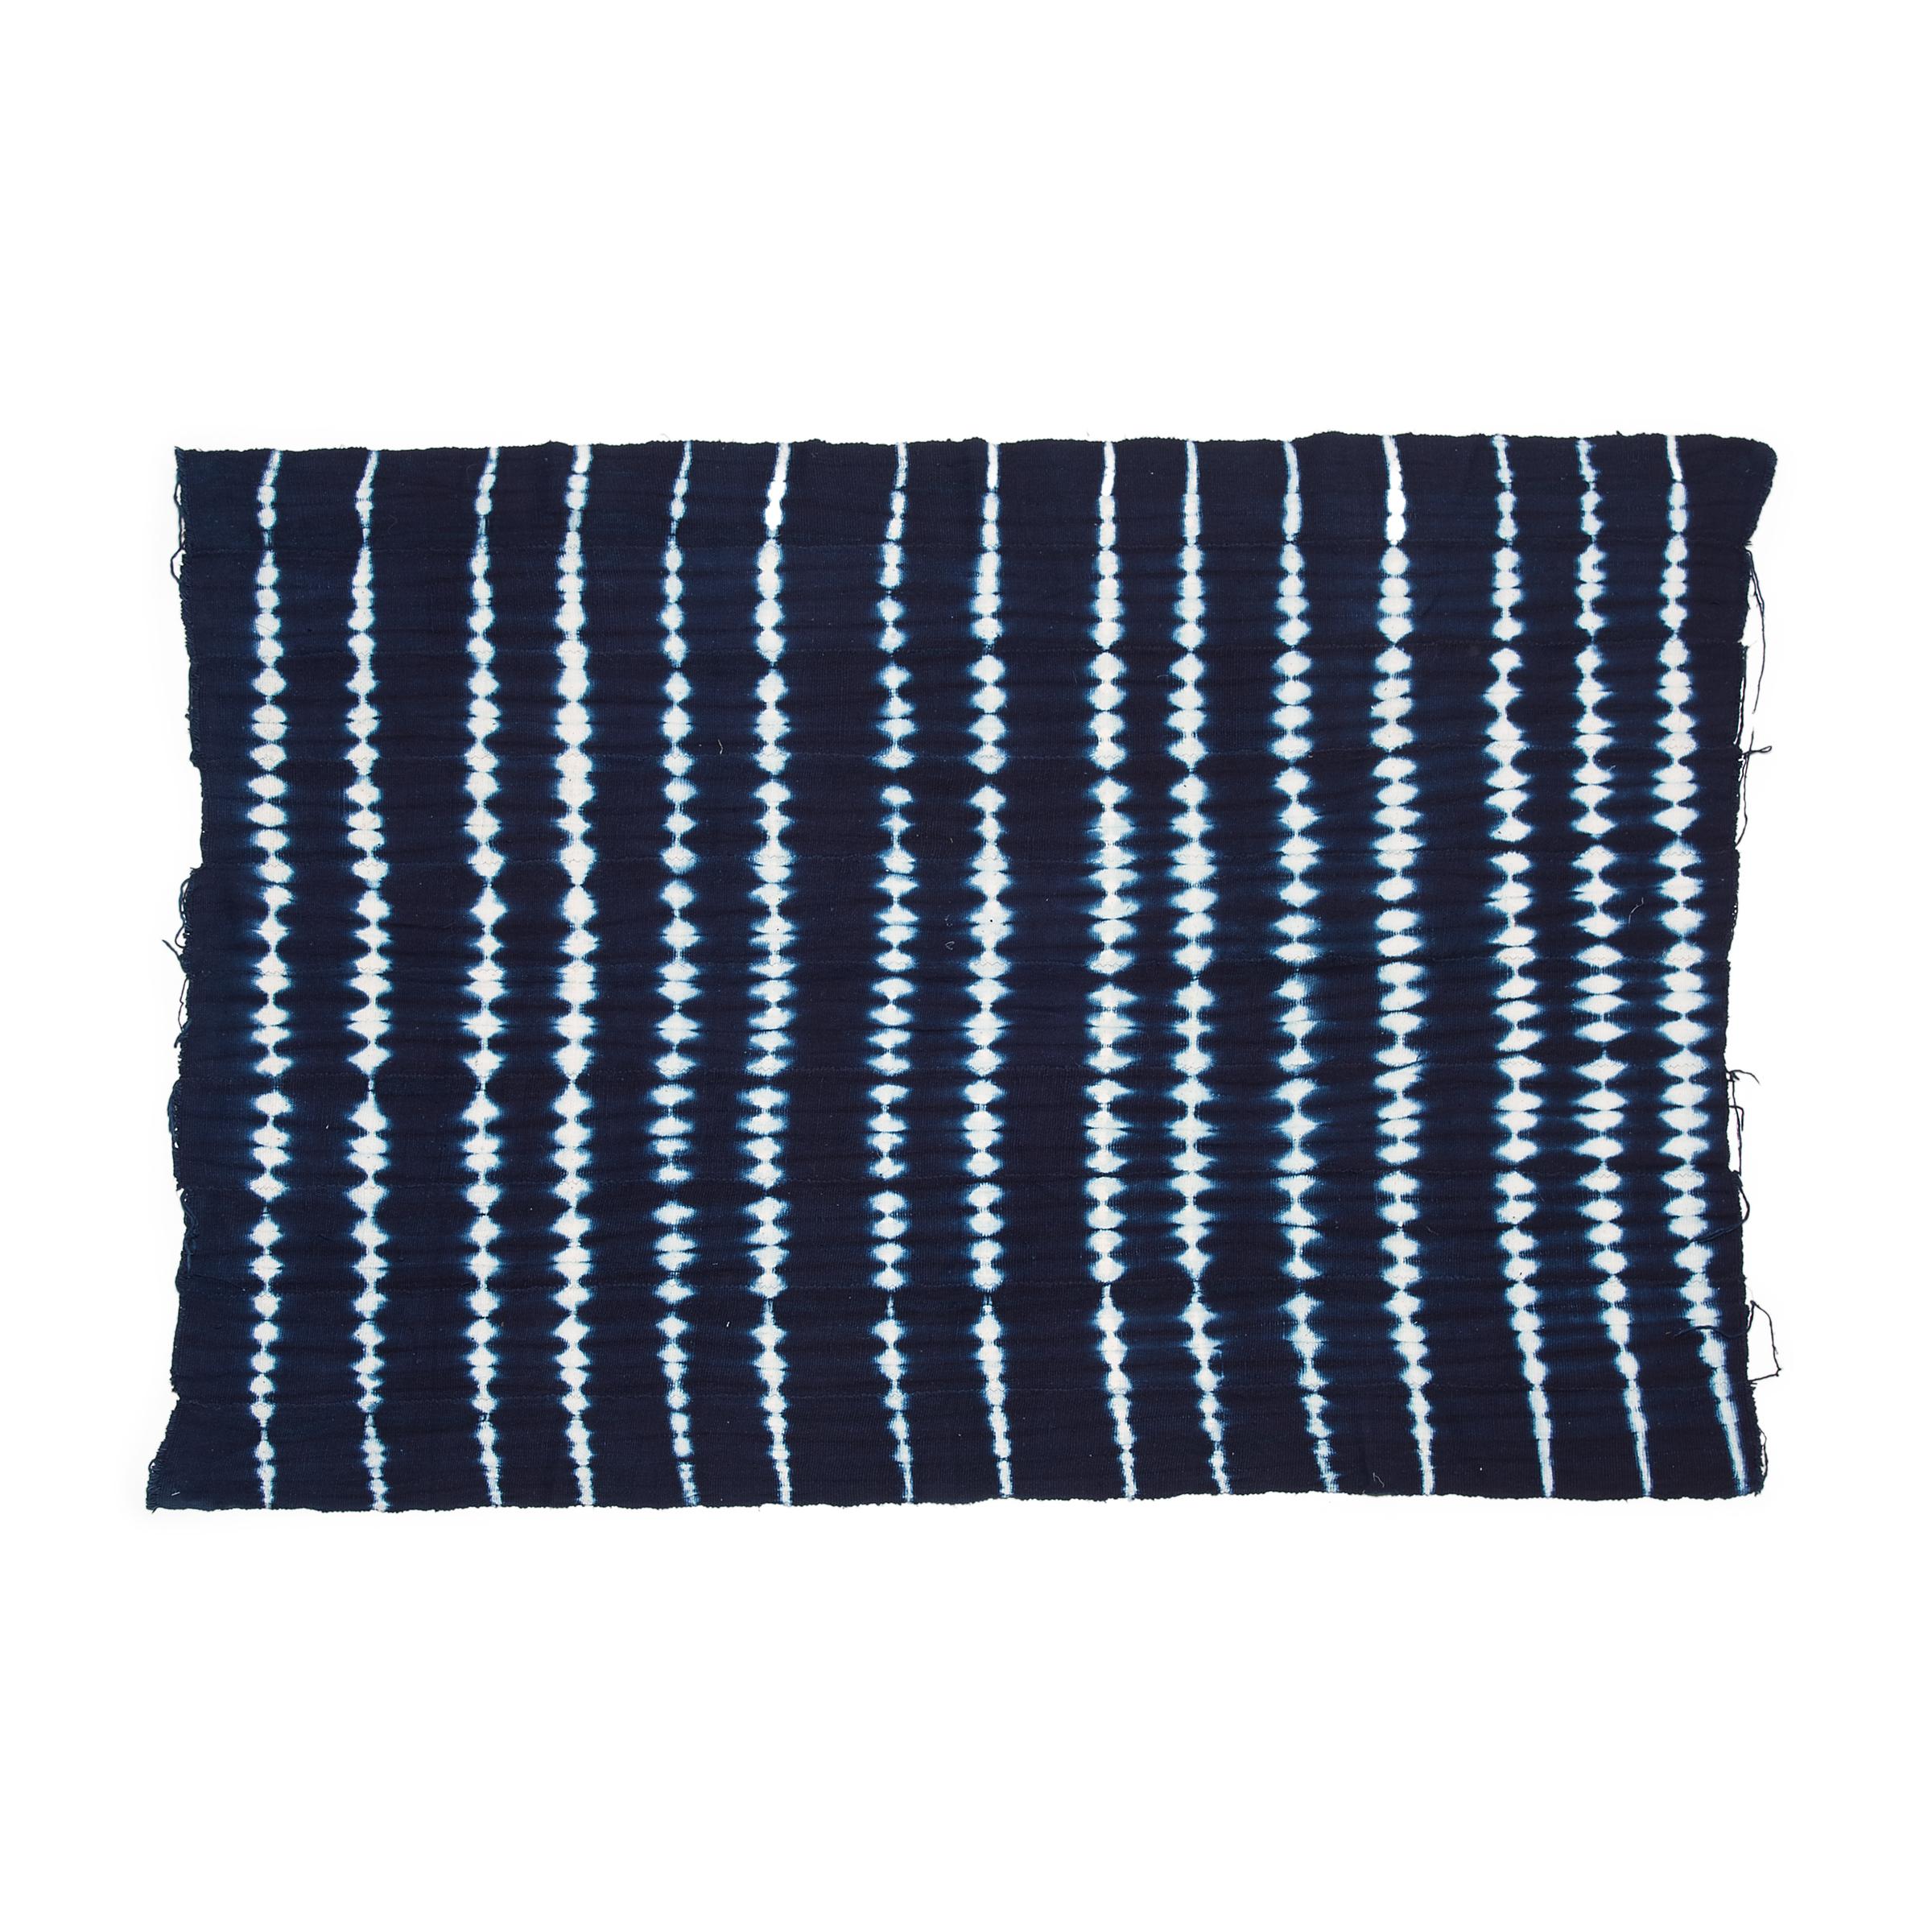 A vibrant and beautifully irregular pattern covers this indigo textile by the Yoruba people of Nigeria. Hand-dyed by women, this style of tie-resist indigo cloth is known as adire oniko and is achieved by tightly tying up portions of the strip-woven